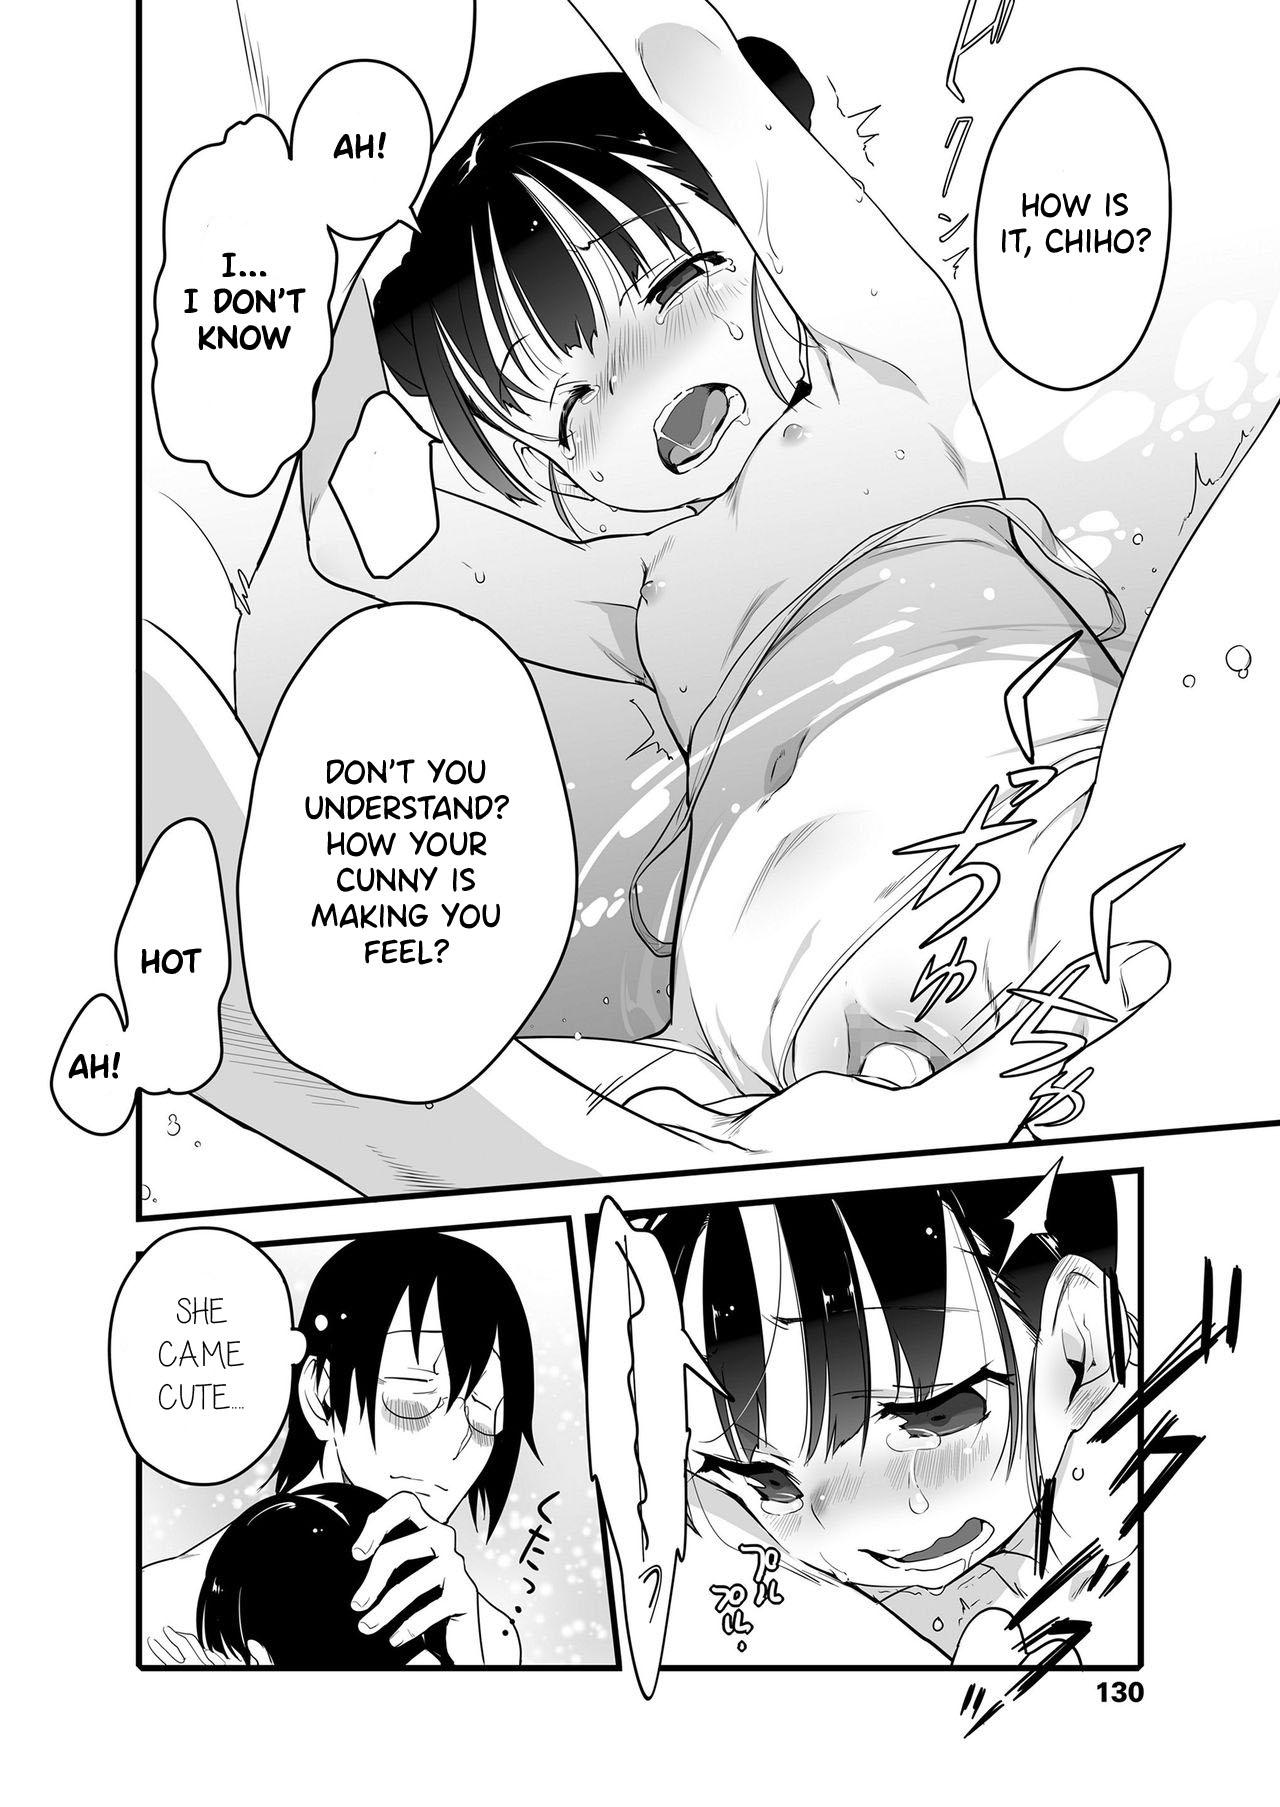 Perfect Tits Uchiage Hanabi, Ane to Miruka? Imouto to Miruka? | Fireworks, Should we see it with the elder sister or the younger sister? Gay Longhair - Page 12